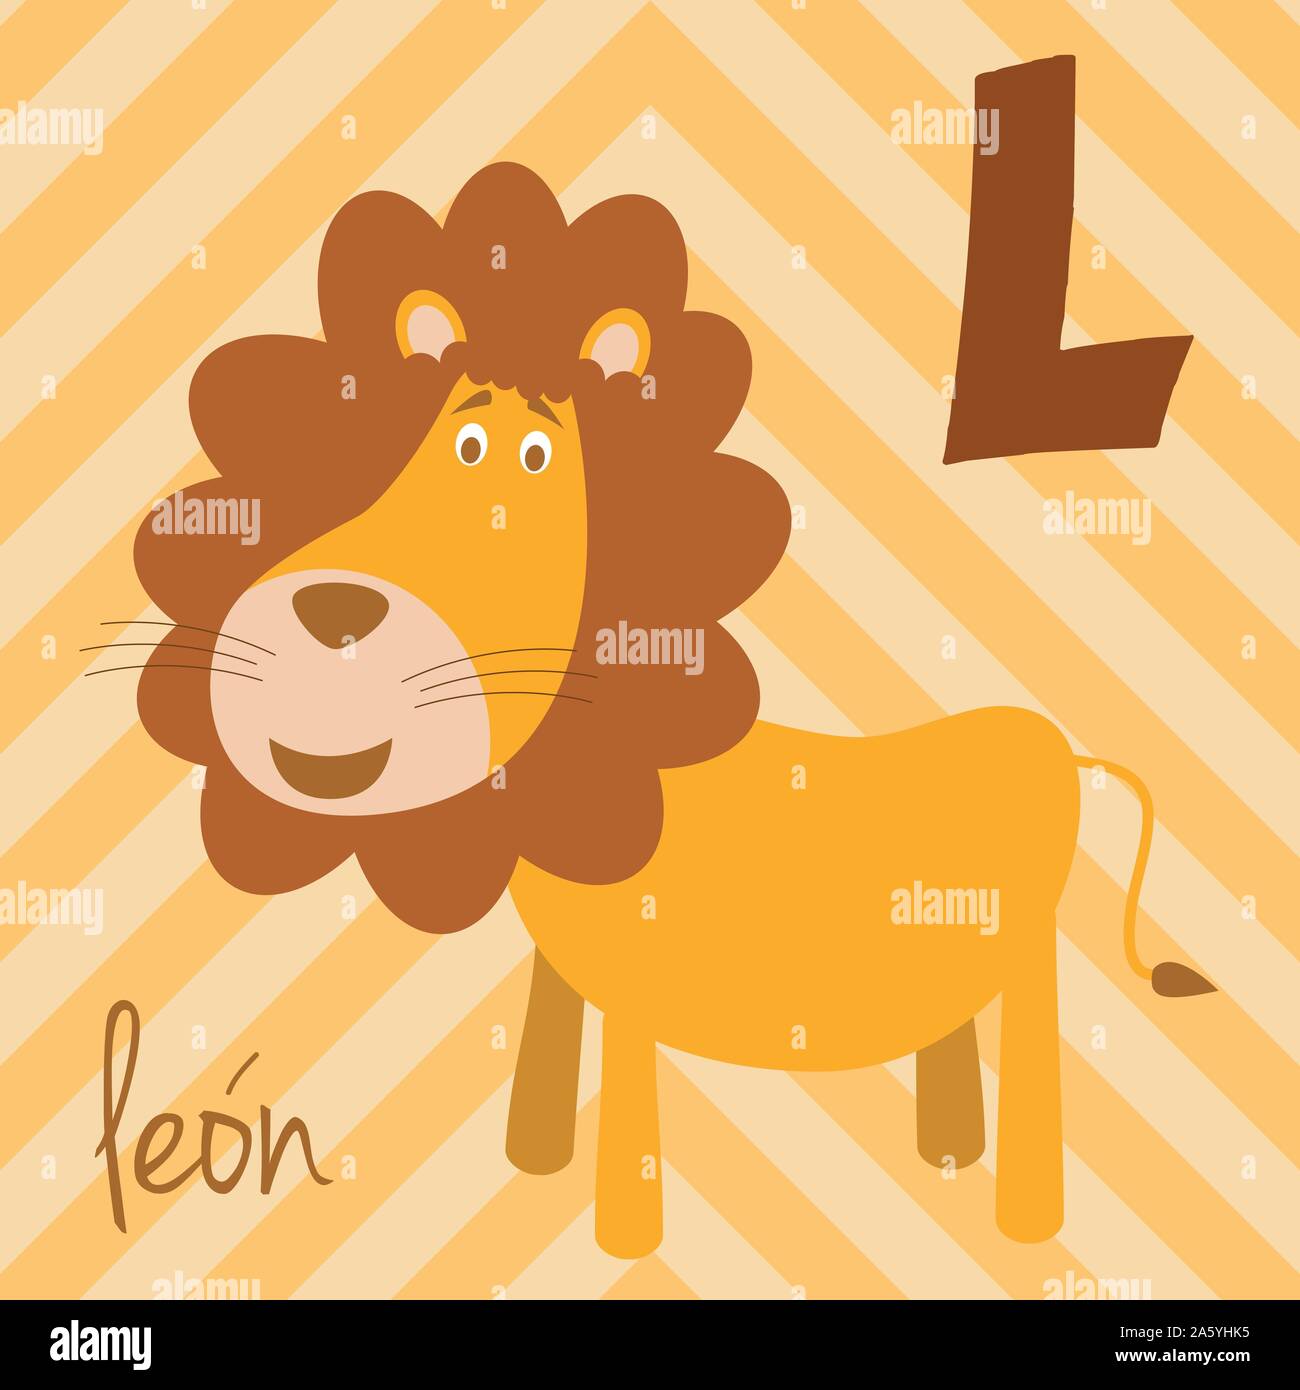 L animal Stock Vector Images - Alamy